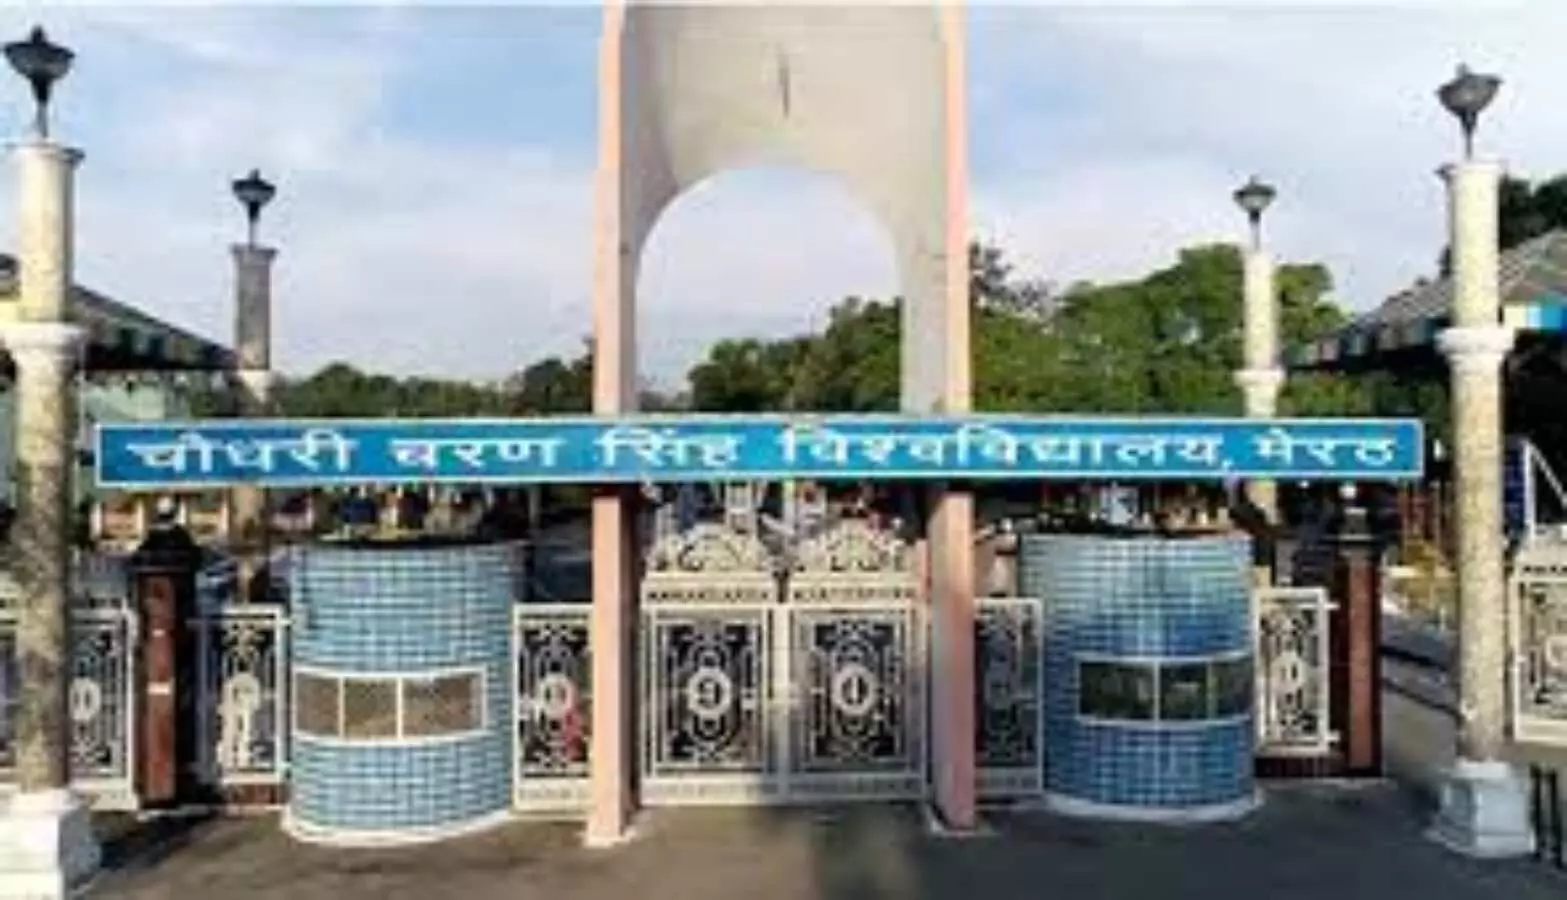 Meerut Chaudhary Charan Singh University Executive Council meeting BEd colleges affiliated decision